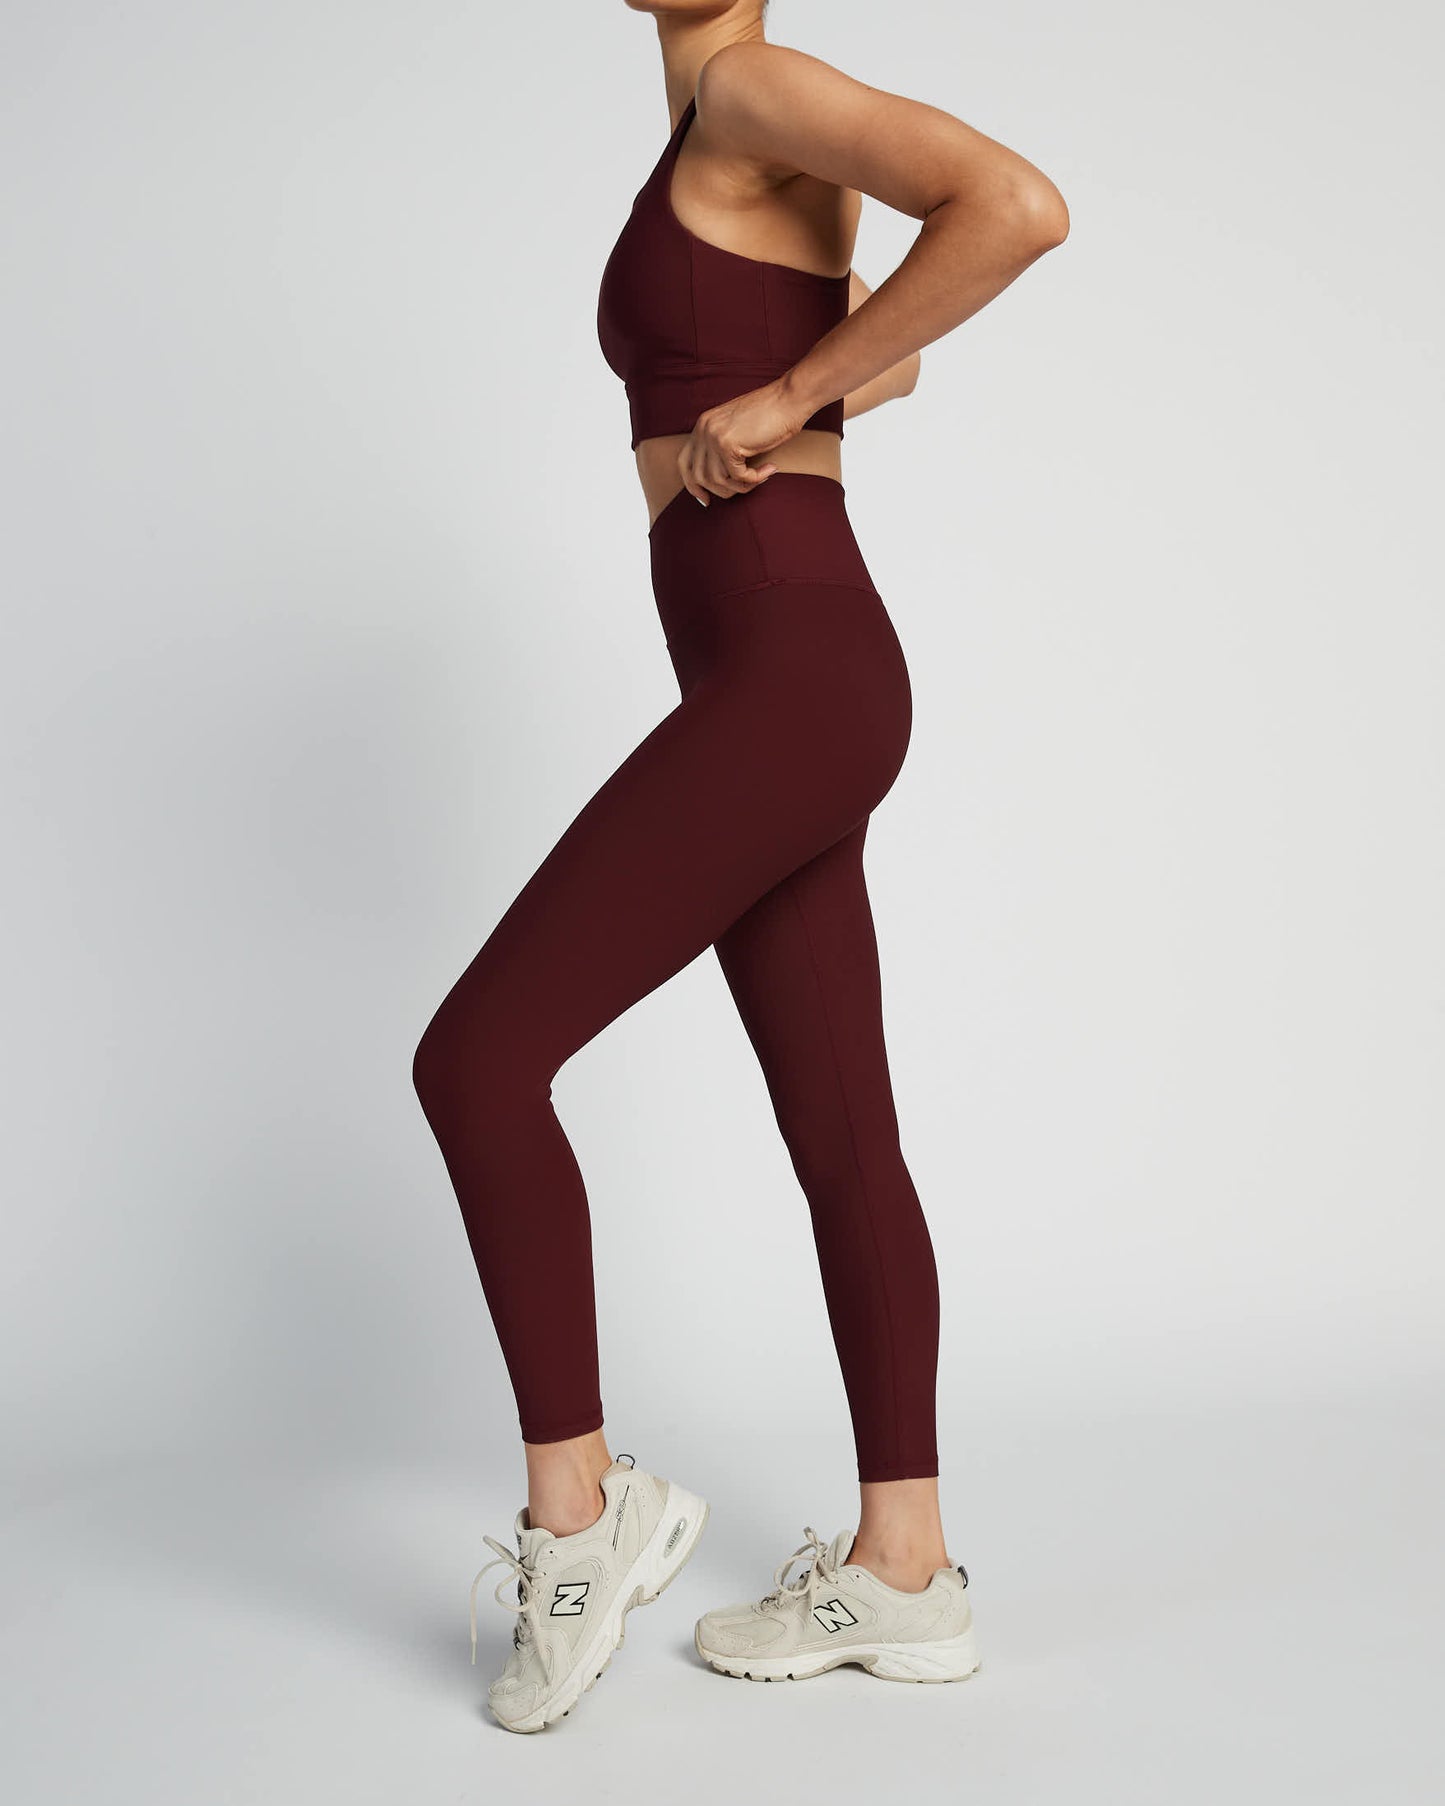 IVL Collective Everyday Leggings Plum High Rise 7/8 Length Compression